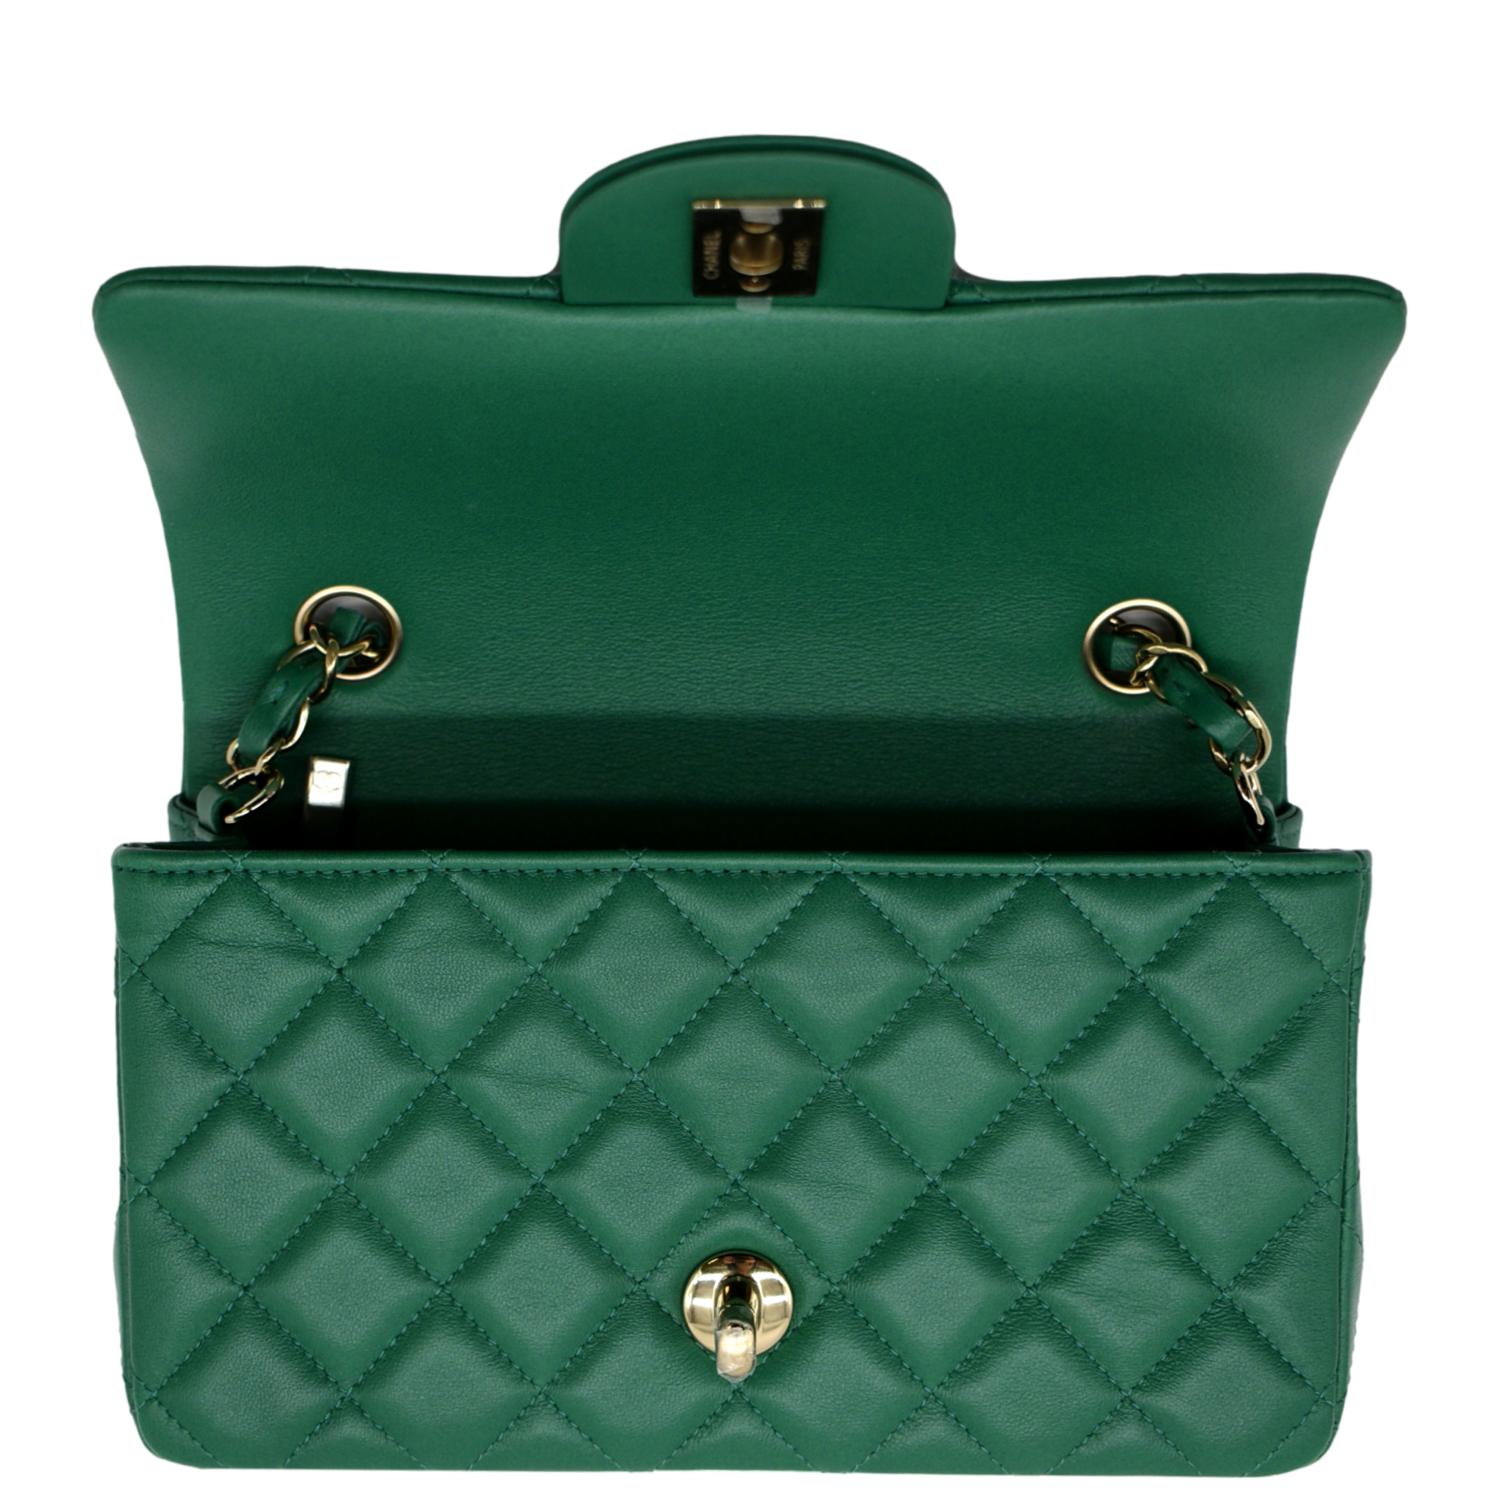 Chanel Maxi 19 Green leather purse 3D model